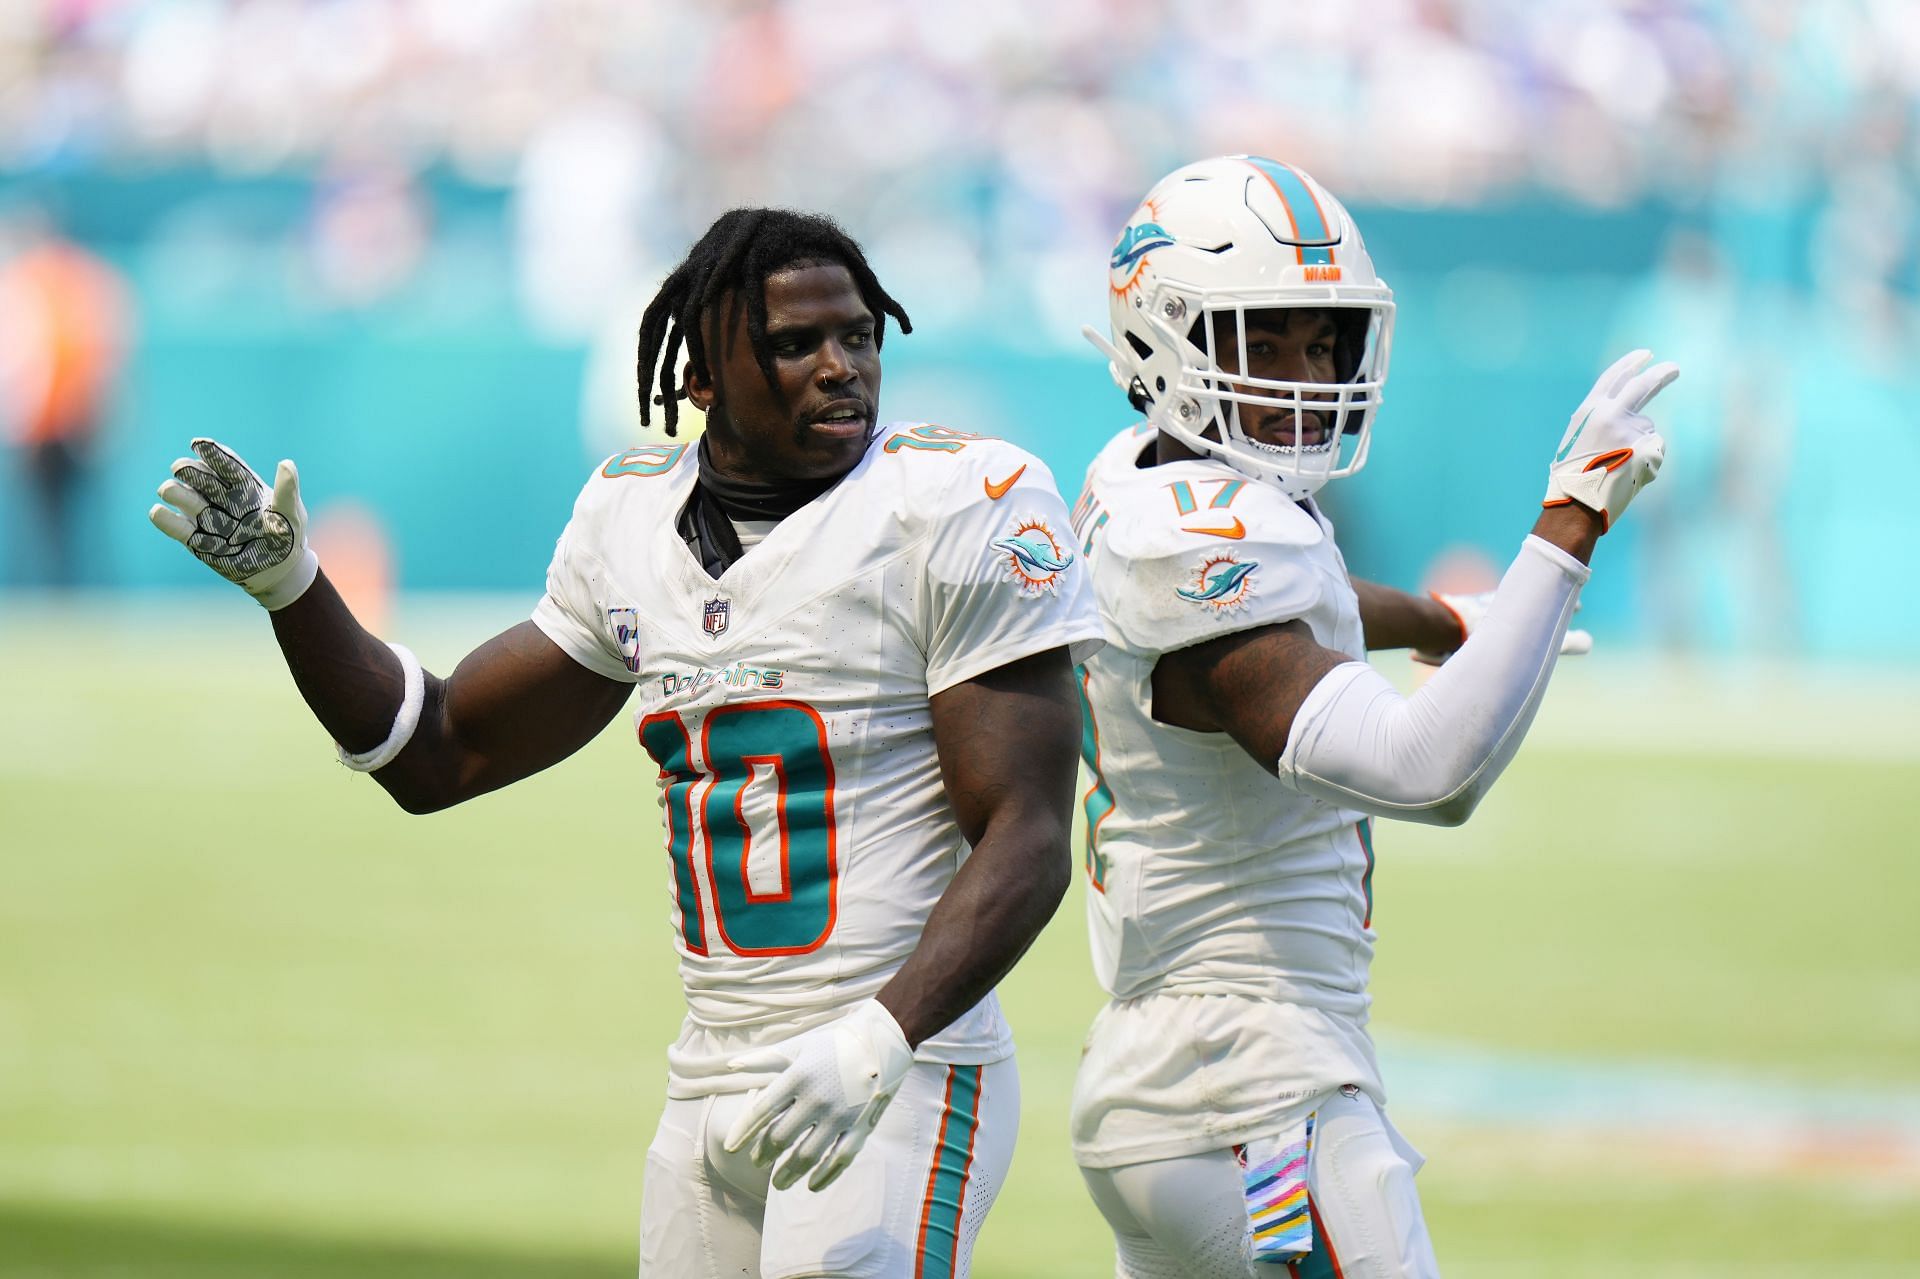 Tyreek Hill (Left) at New York Giants v Miami Dolphins